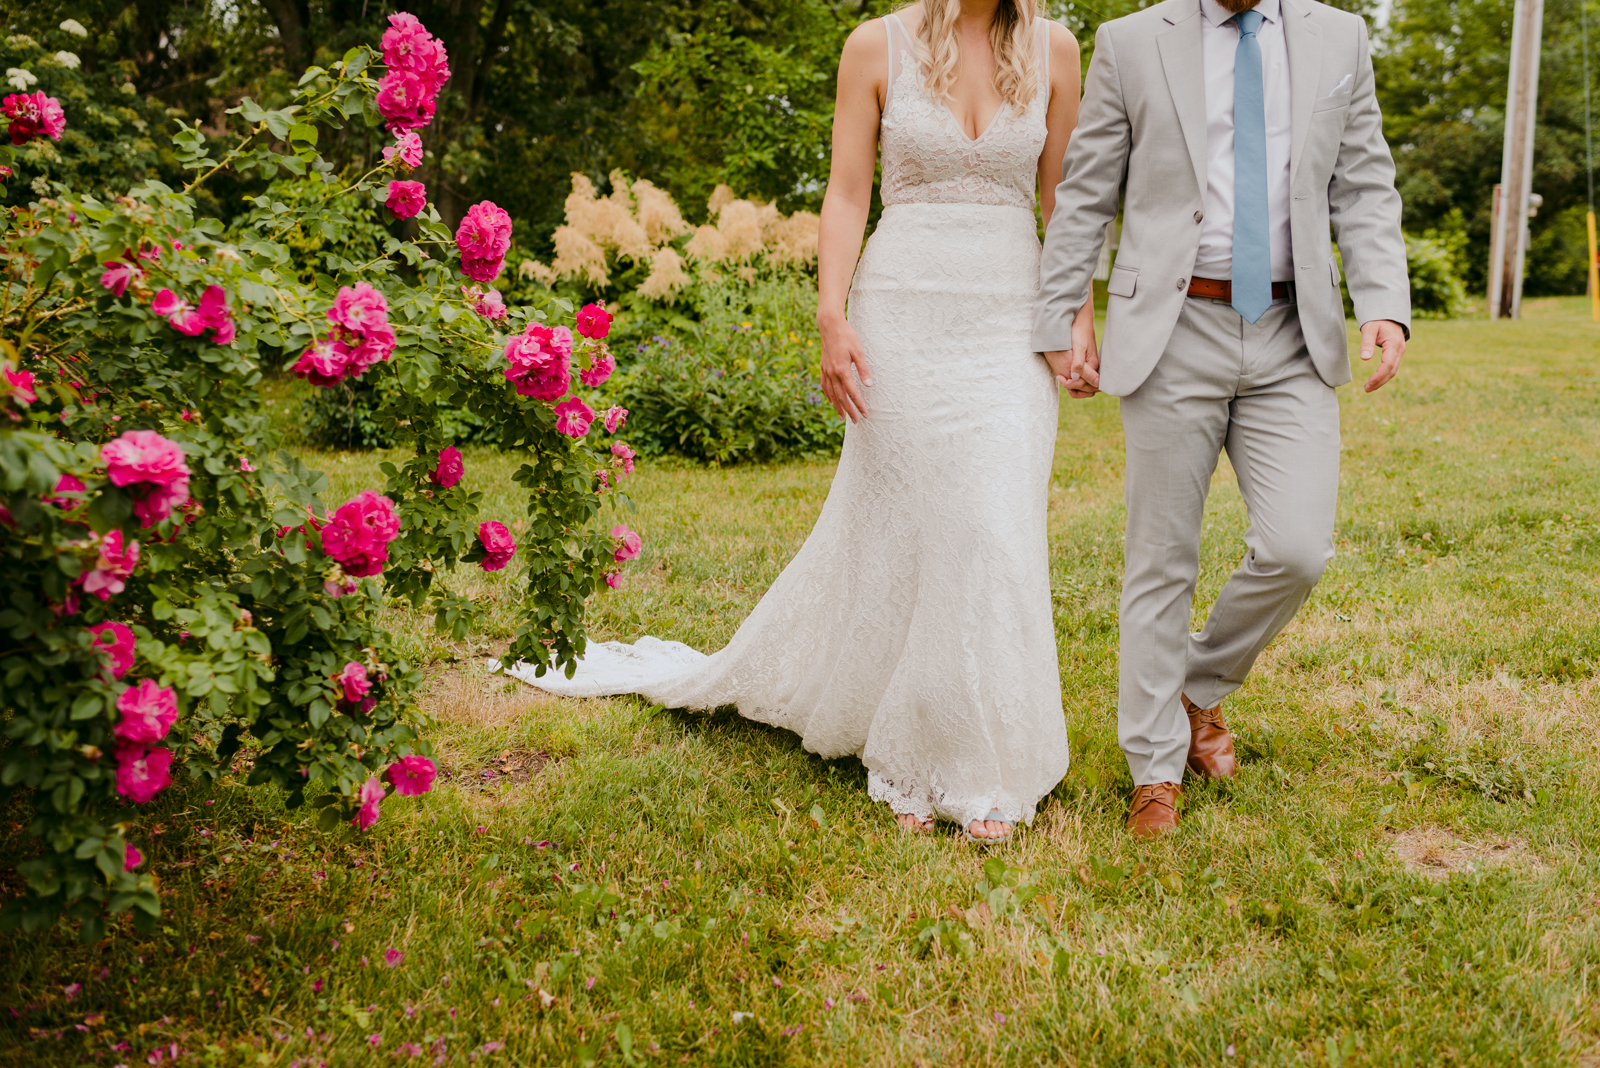 bride and groom walking through the garden of pink roses at Strathmere